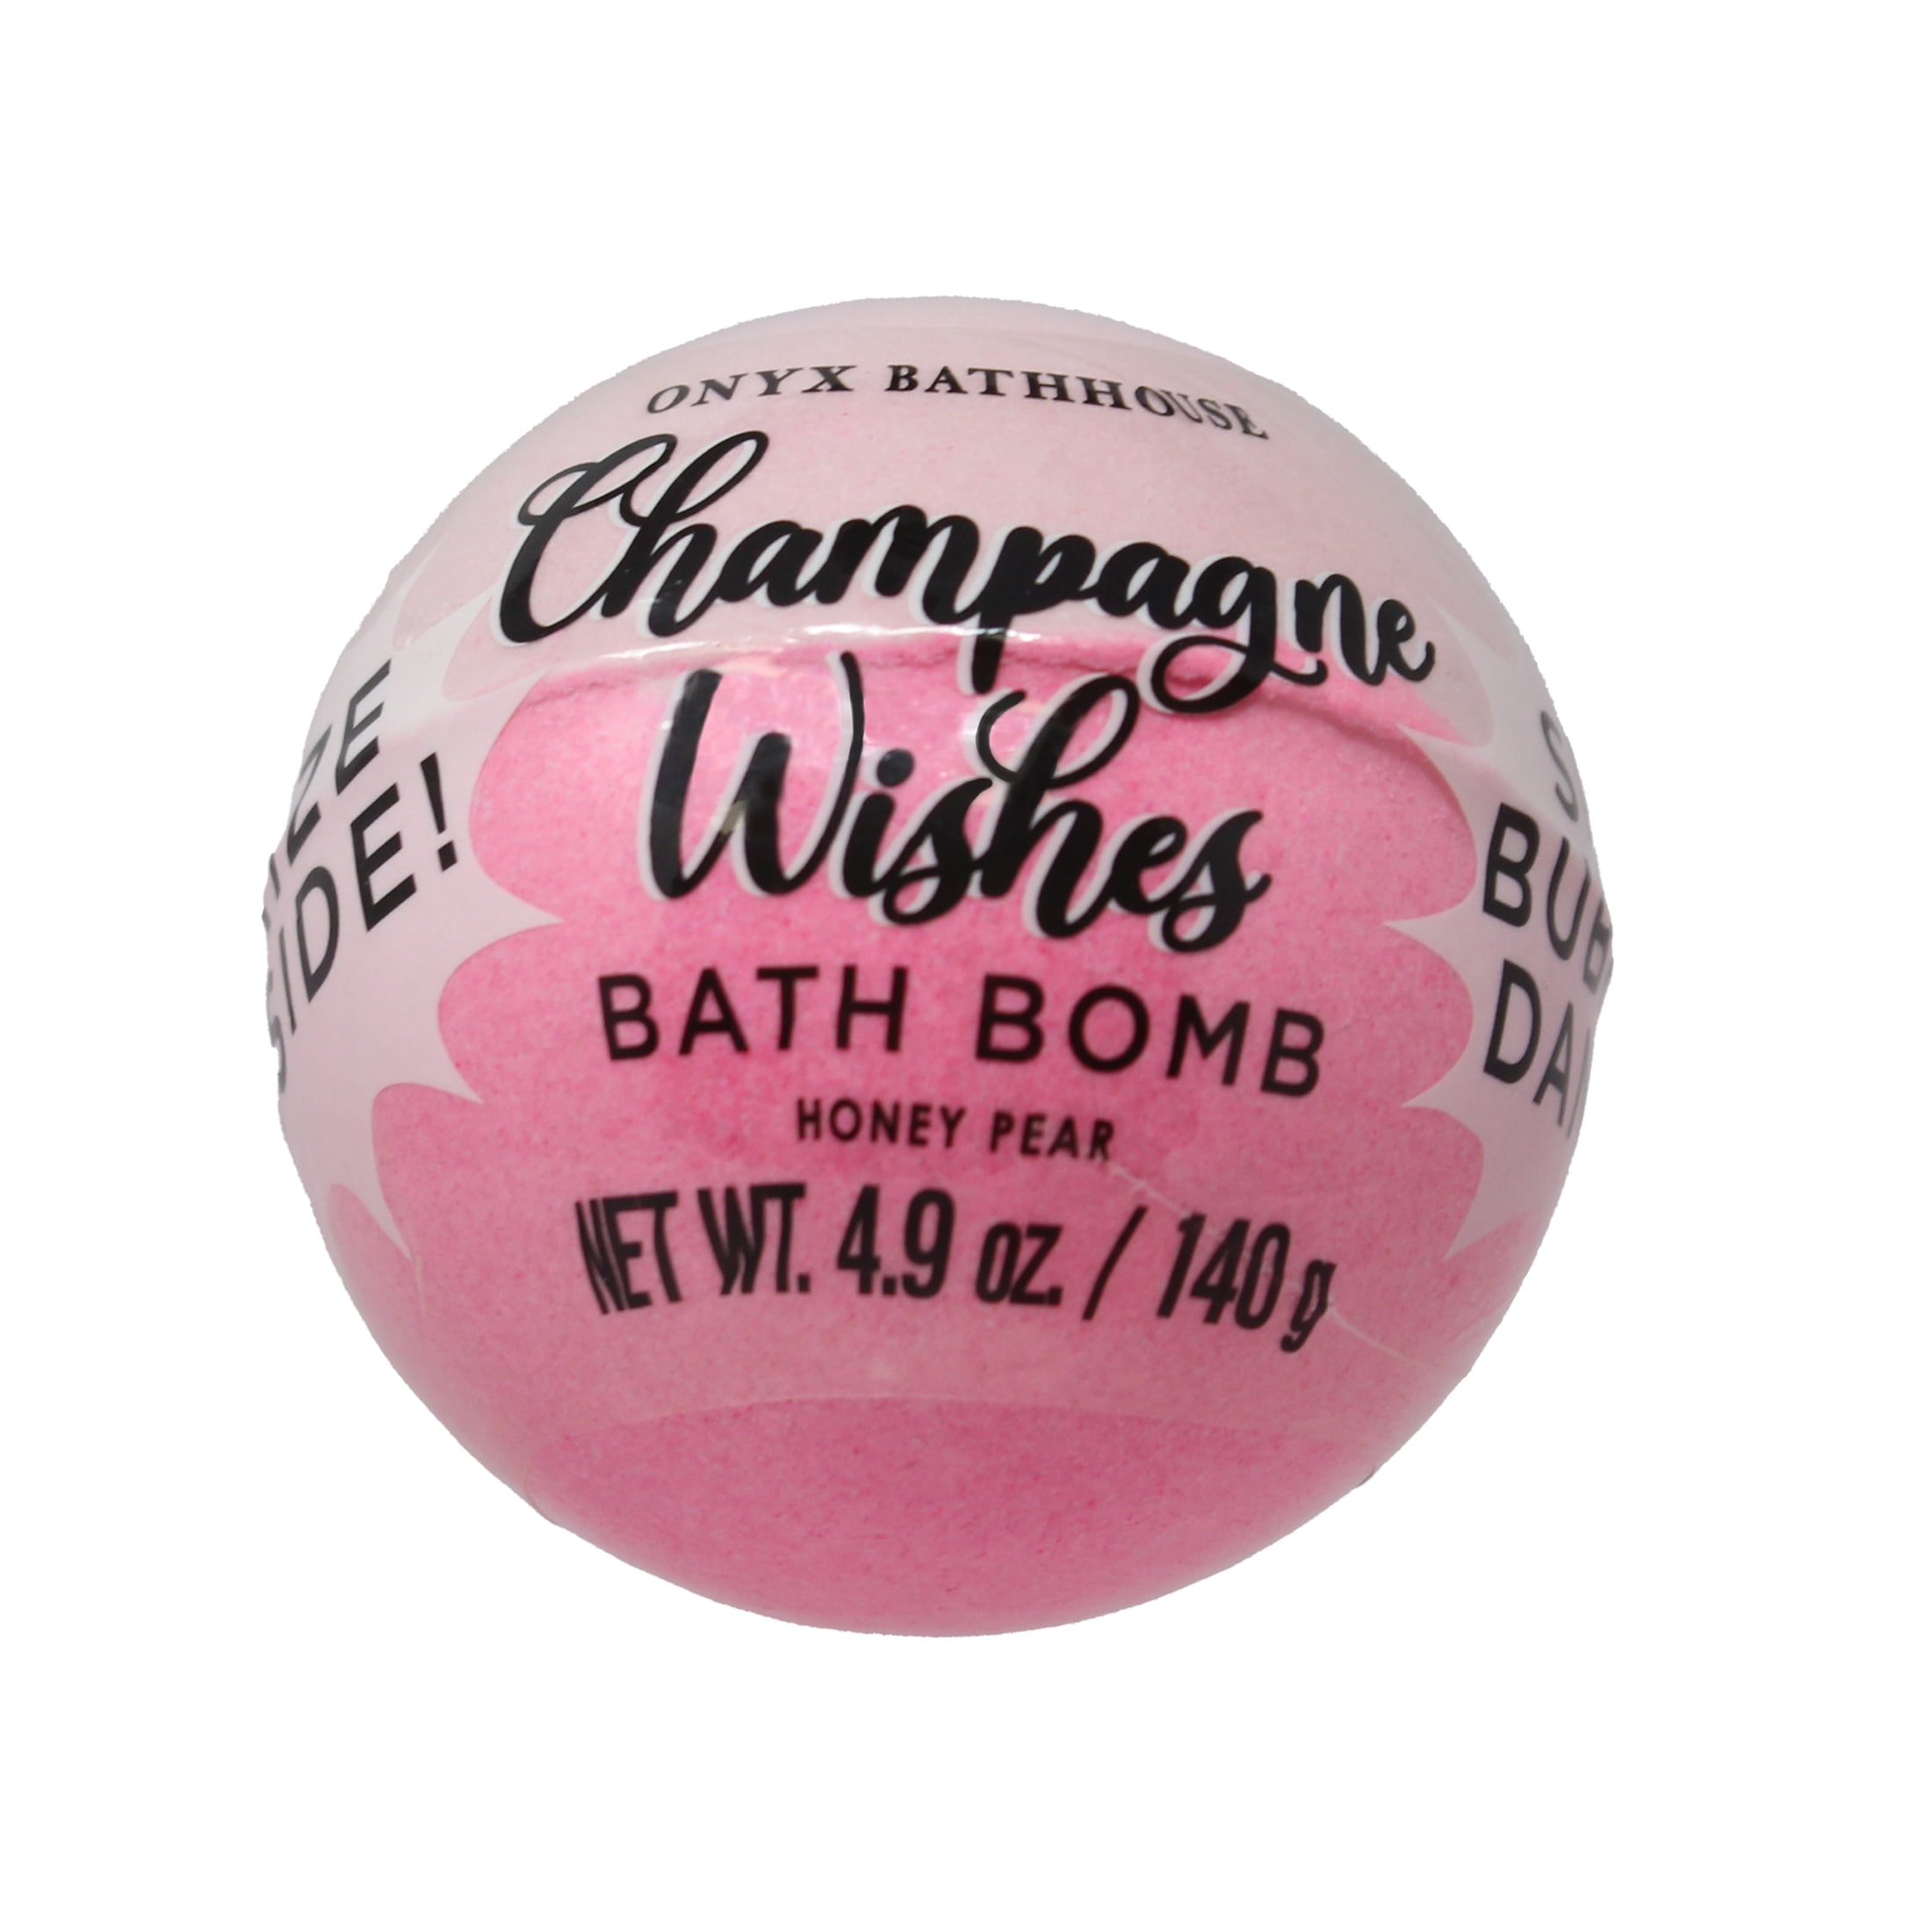 Onyx Brands Onyx Bathhouse Champagne Wishes Bath Bomb With Prize - Honey and Pear Scent